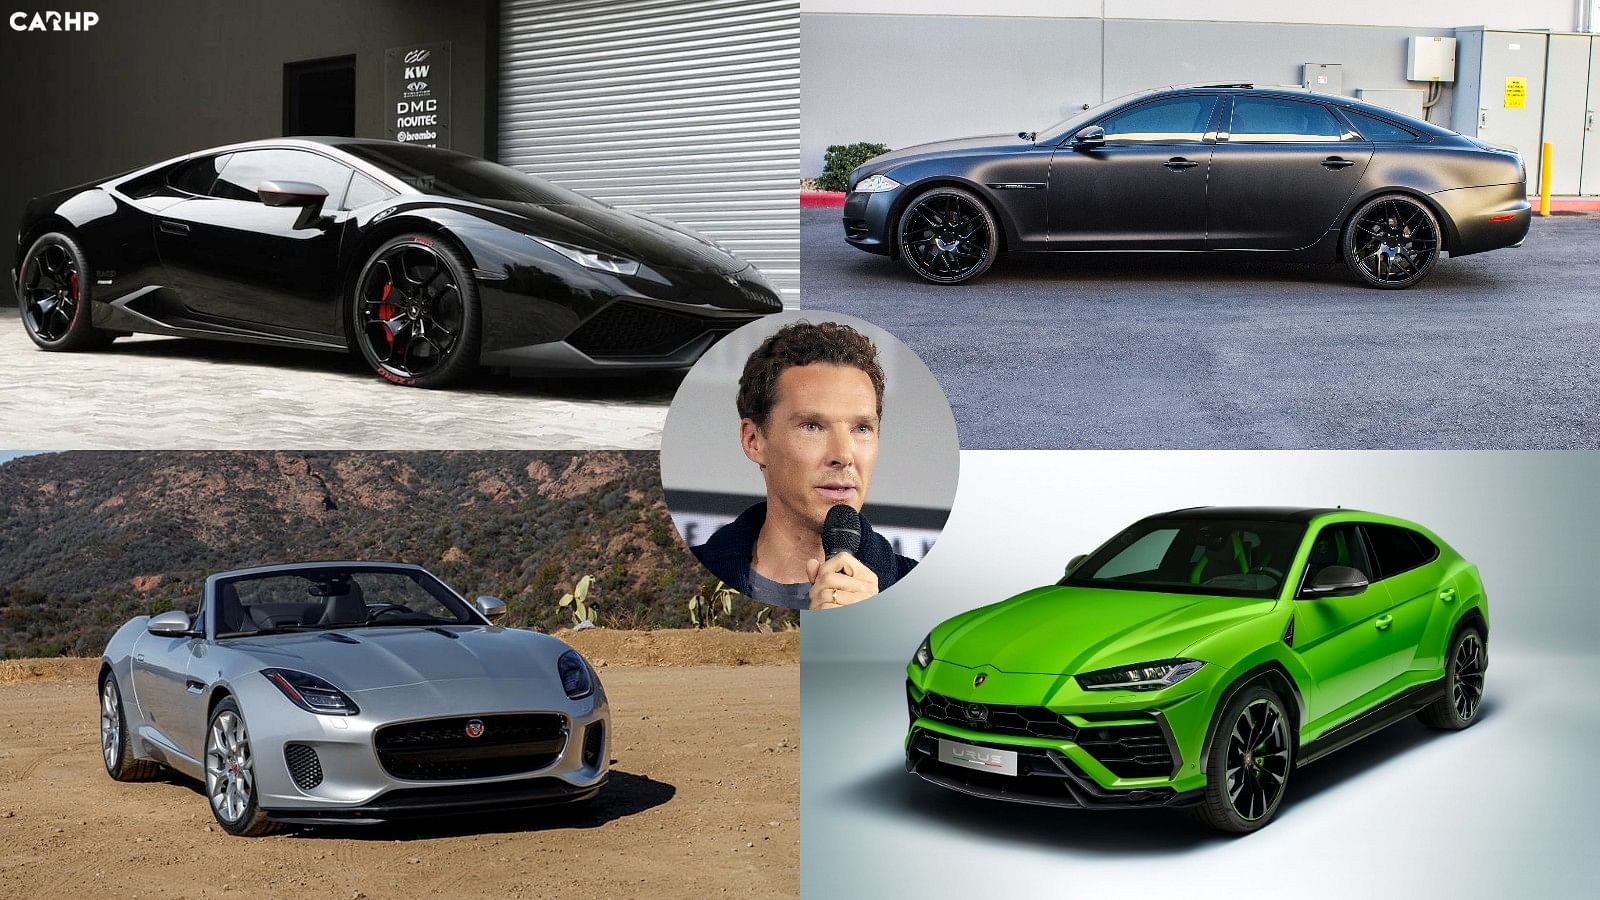 Inside the Garage of Benedict Cumberbatch's Incredible Car Collection